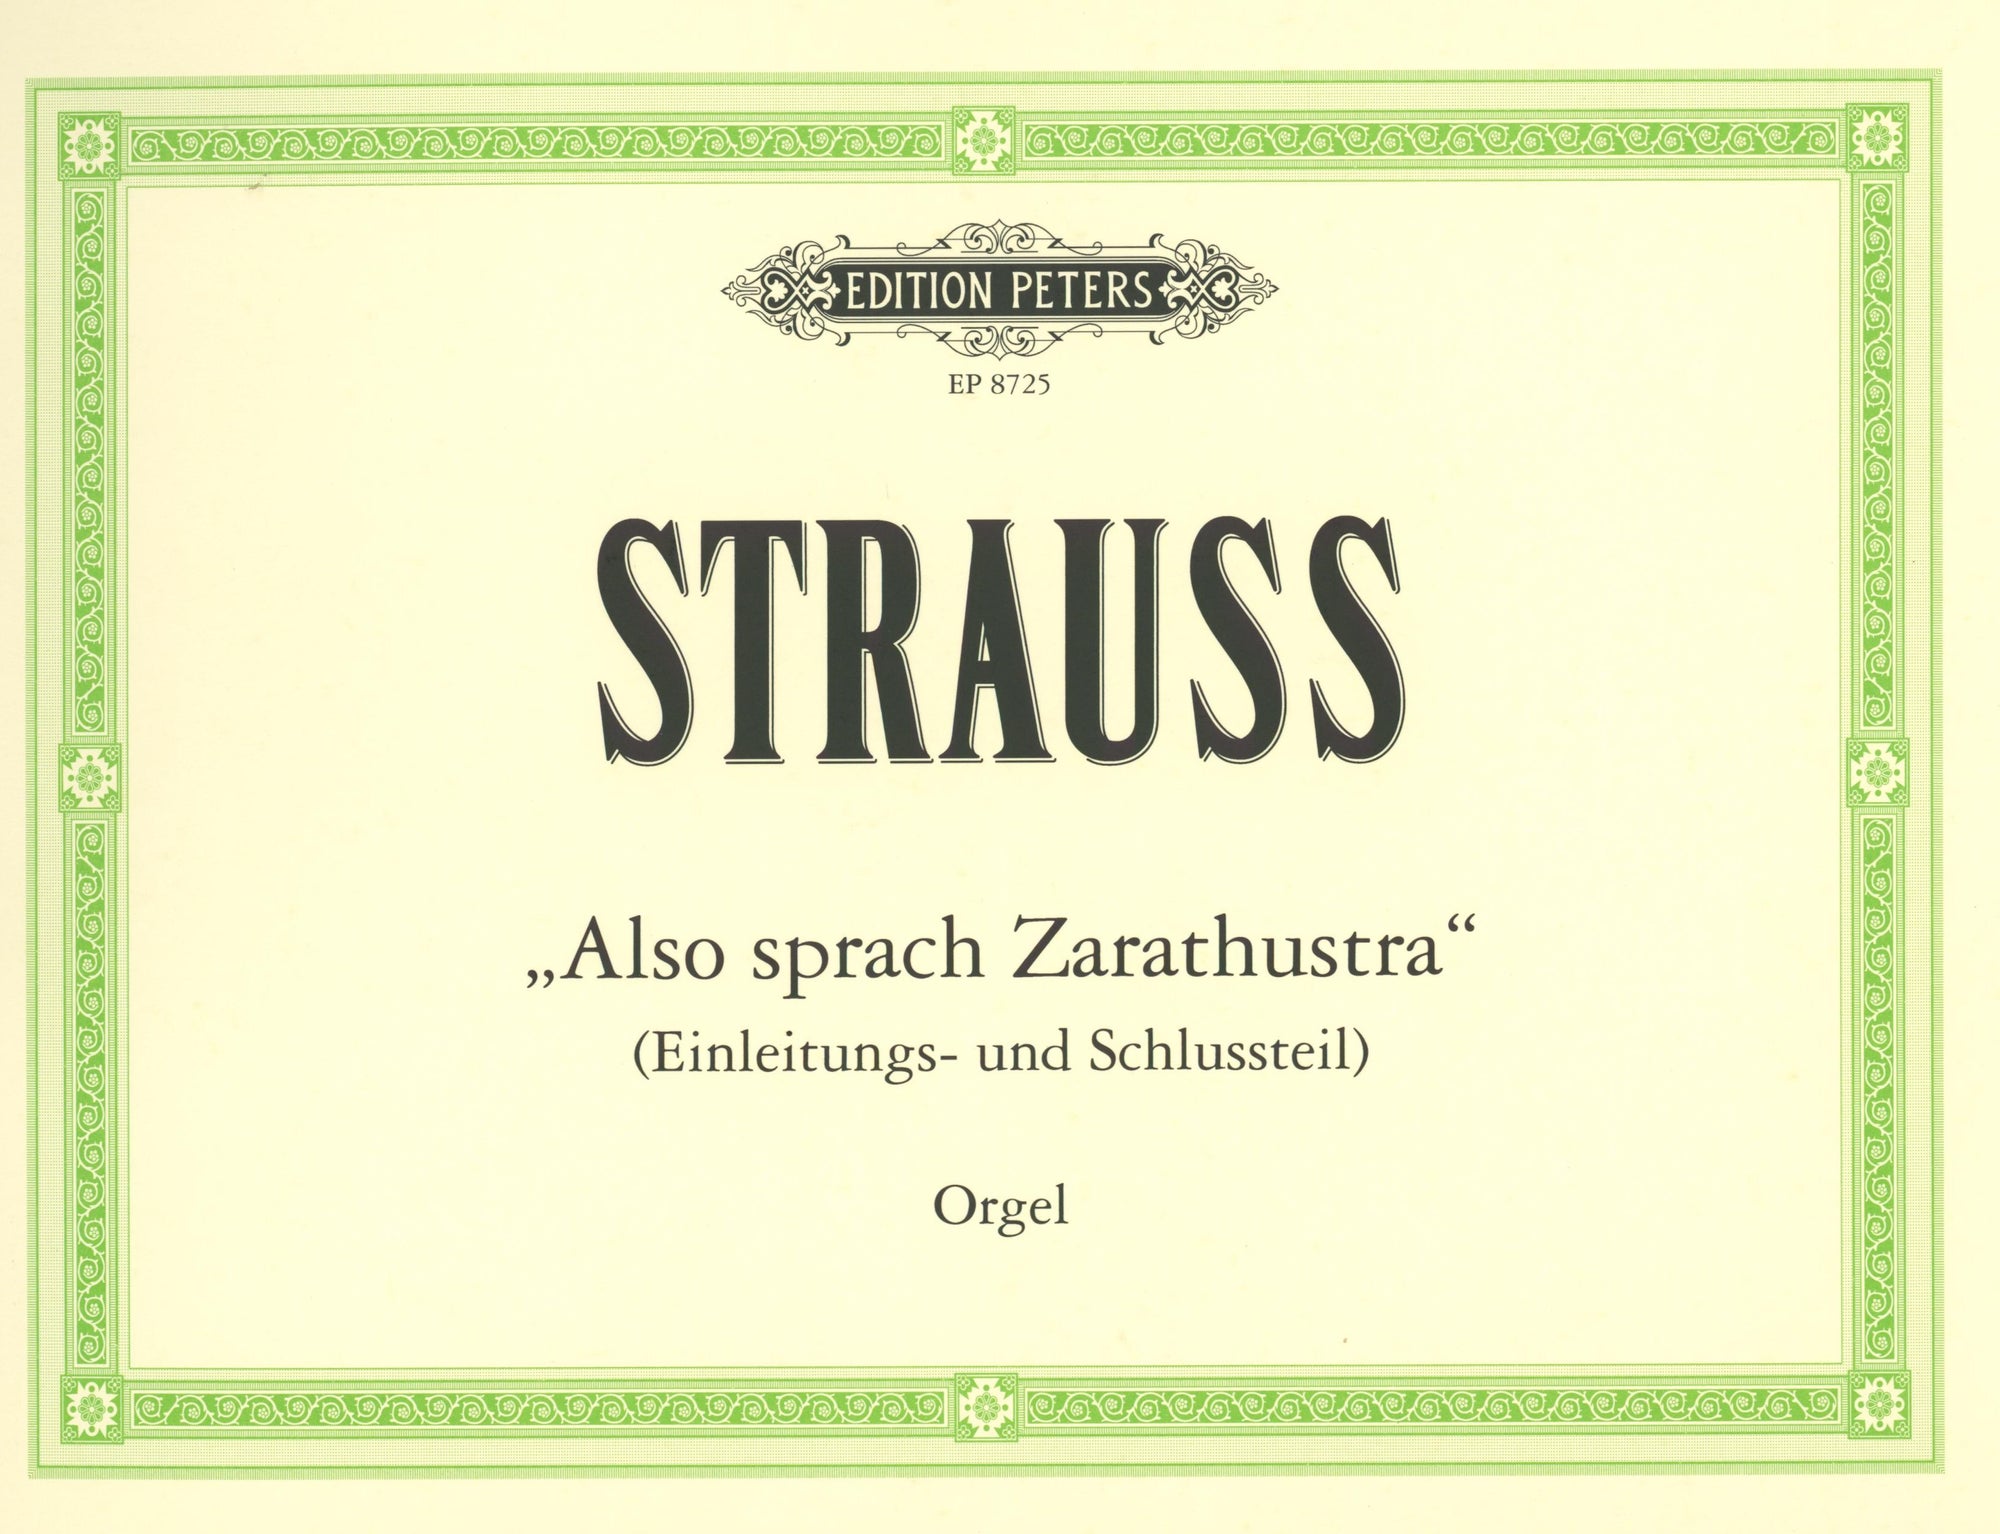 Strauss: Also sprach Zarathustra, Op. 30 - Opening & Conclusion (arr. for organ)